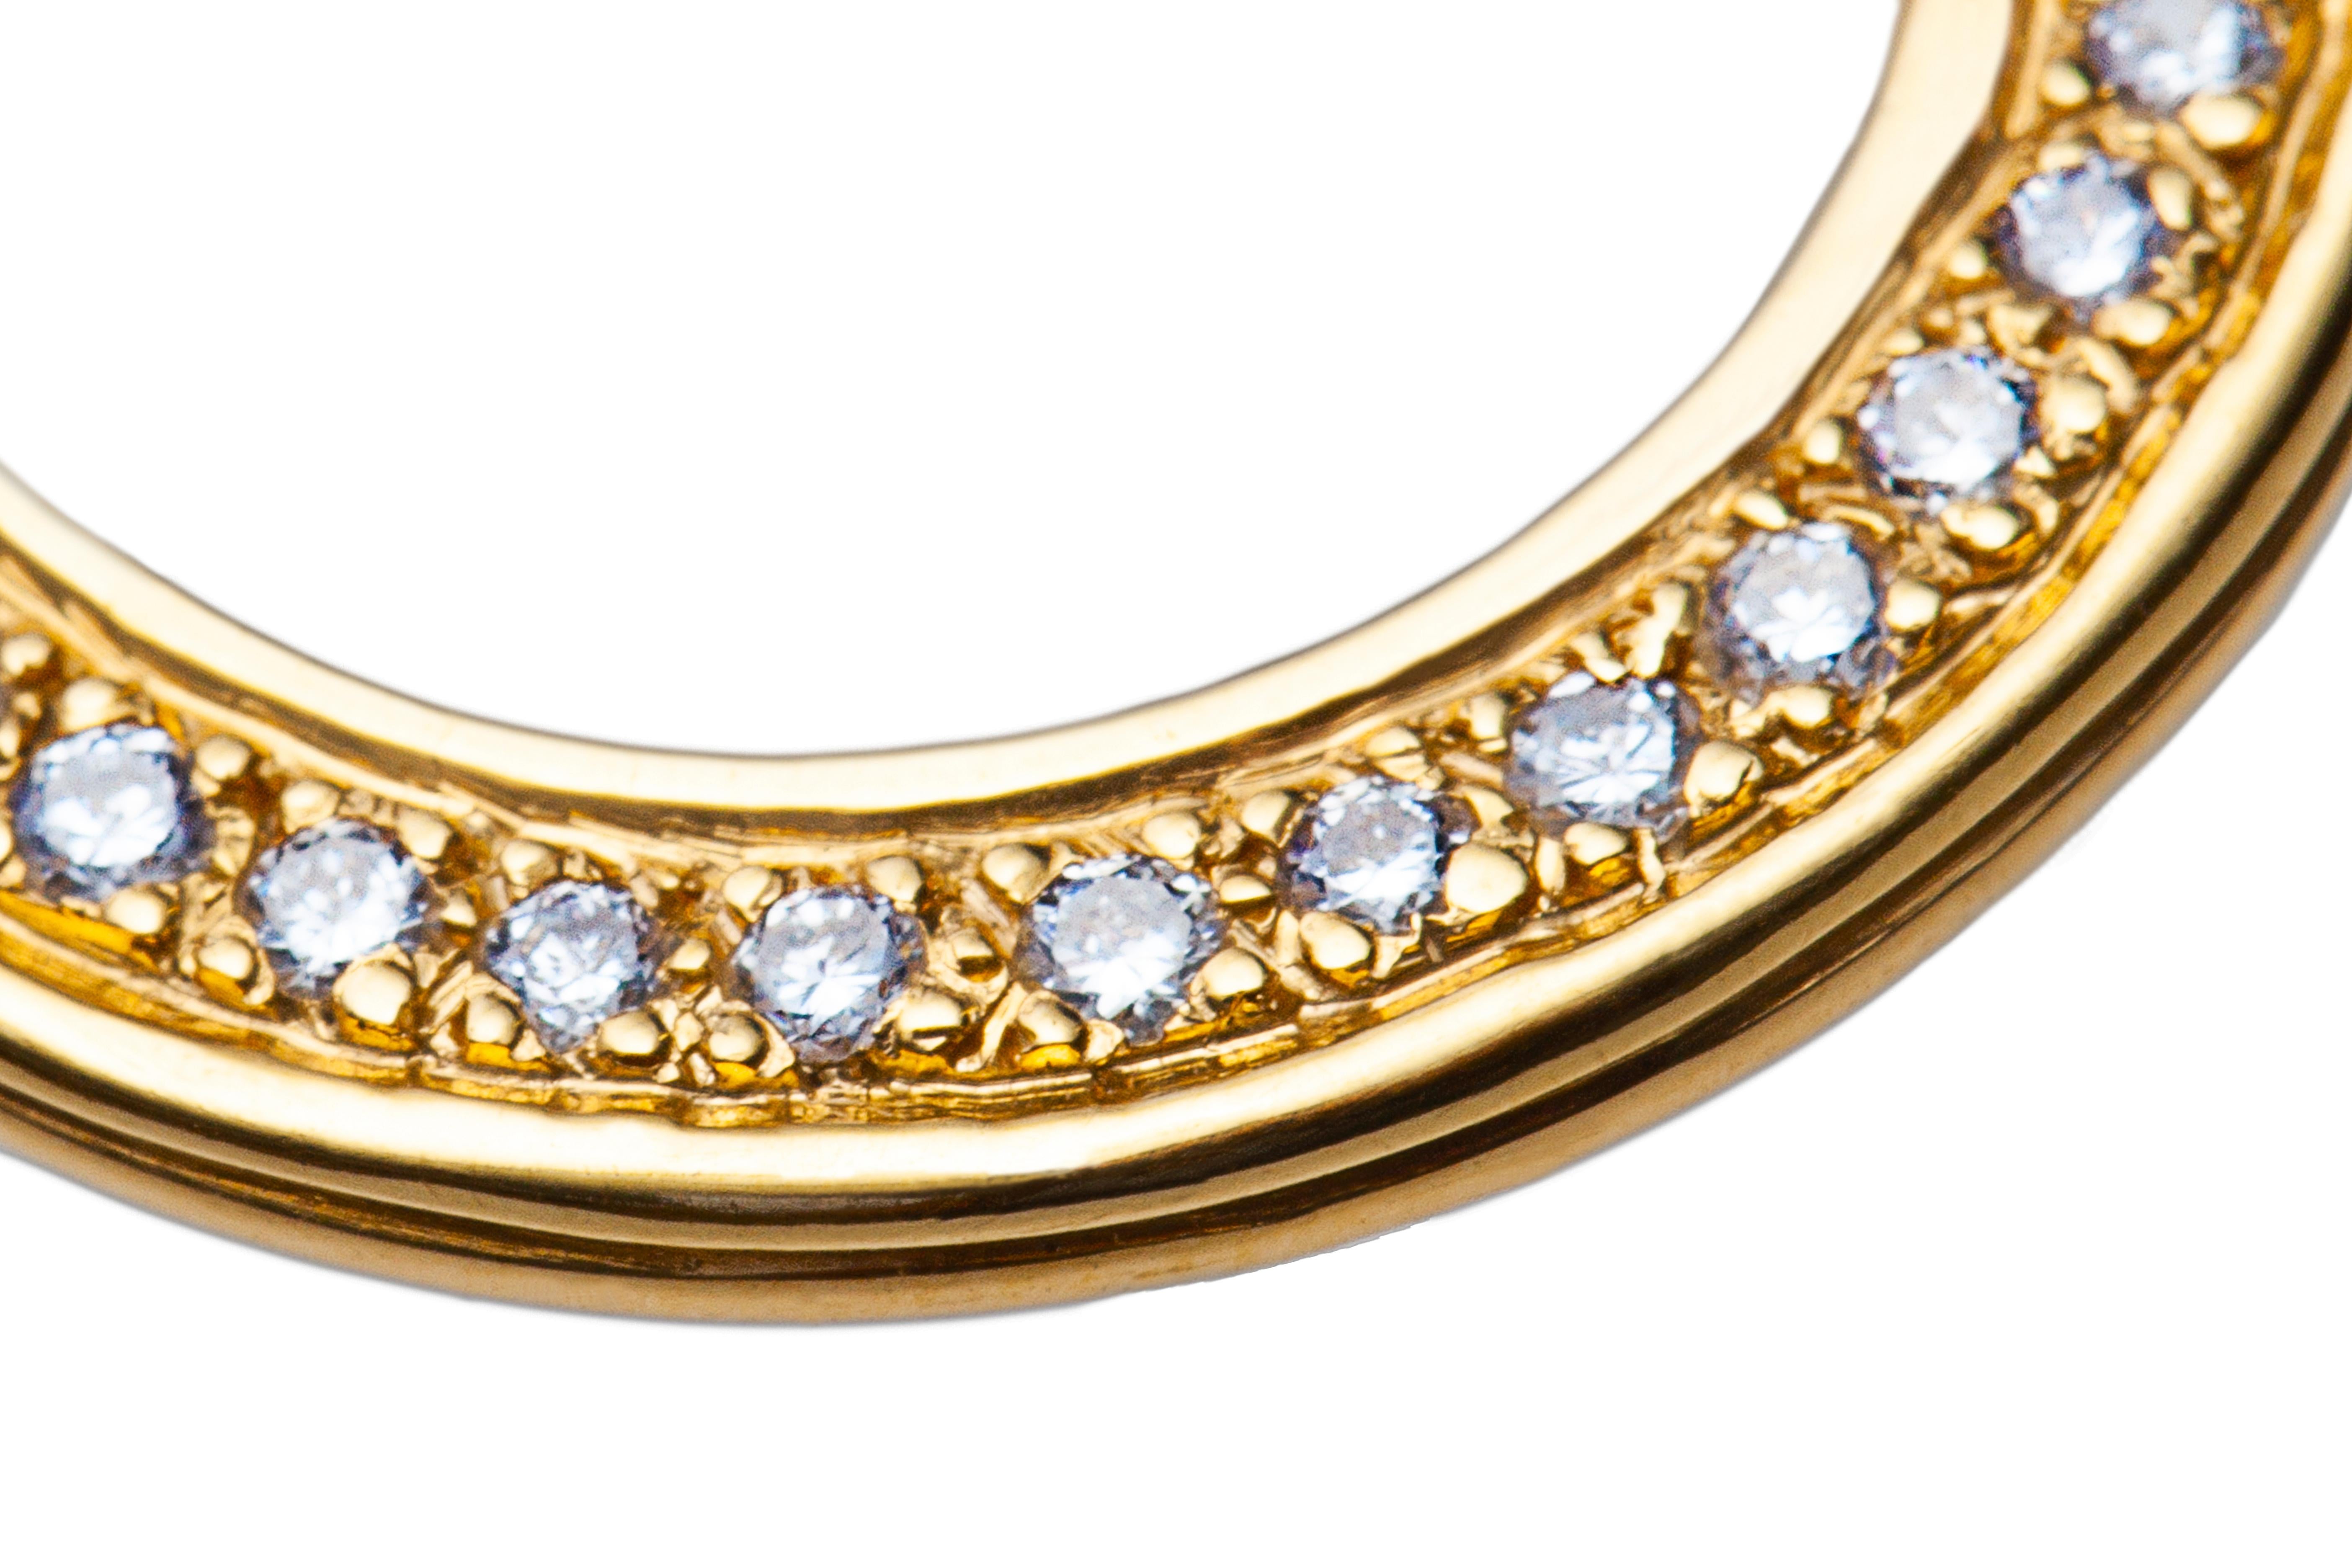 Circular diamond pendant with 33 round diamonds weighing .33cts total and handmade in 18k yellow gold.